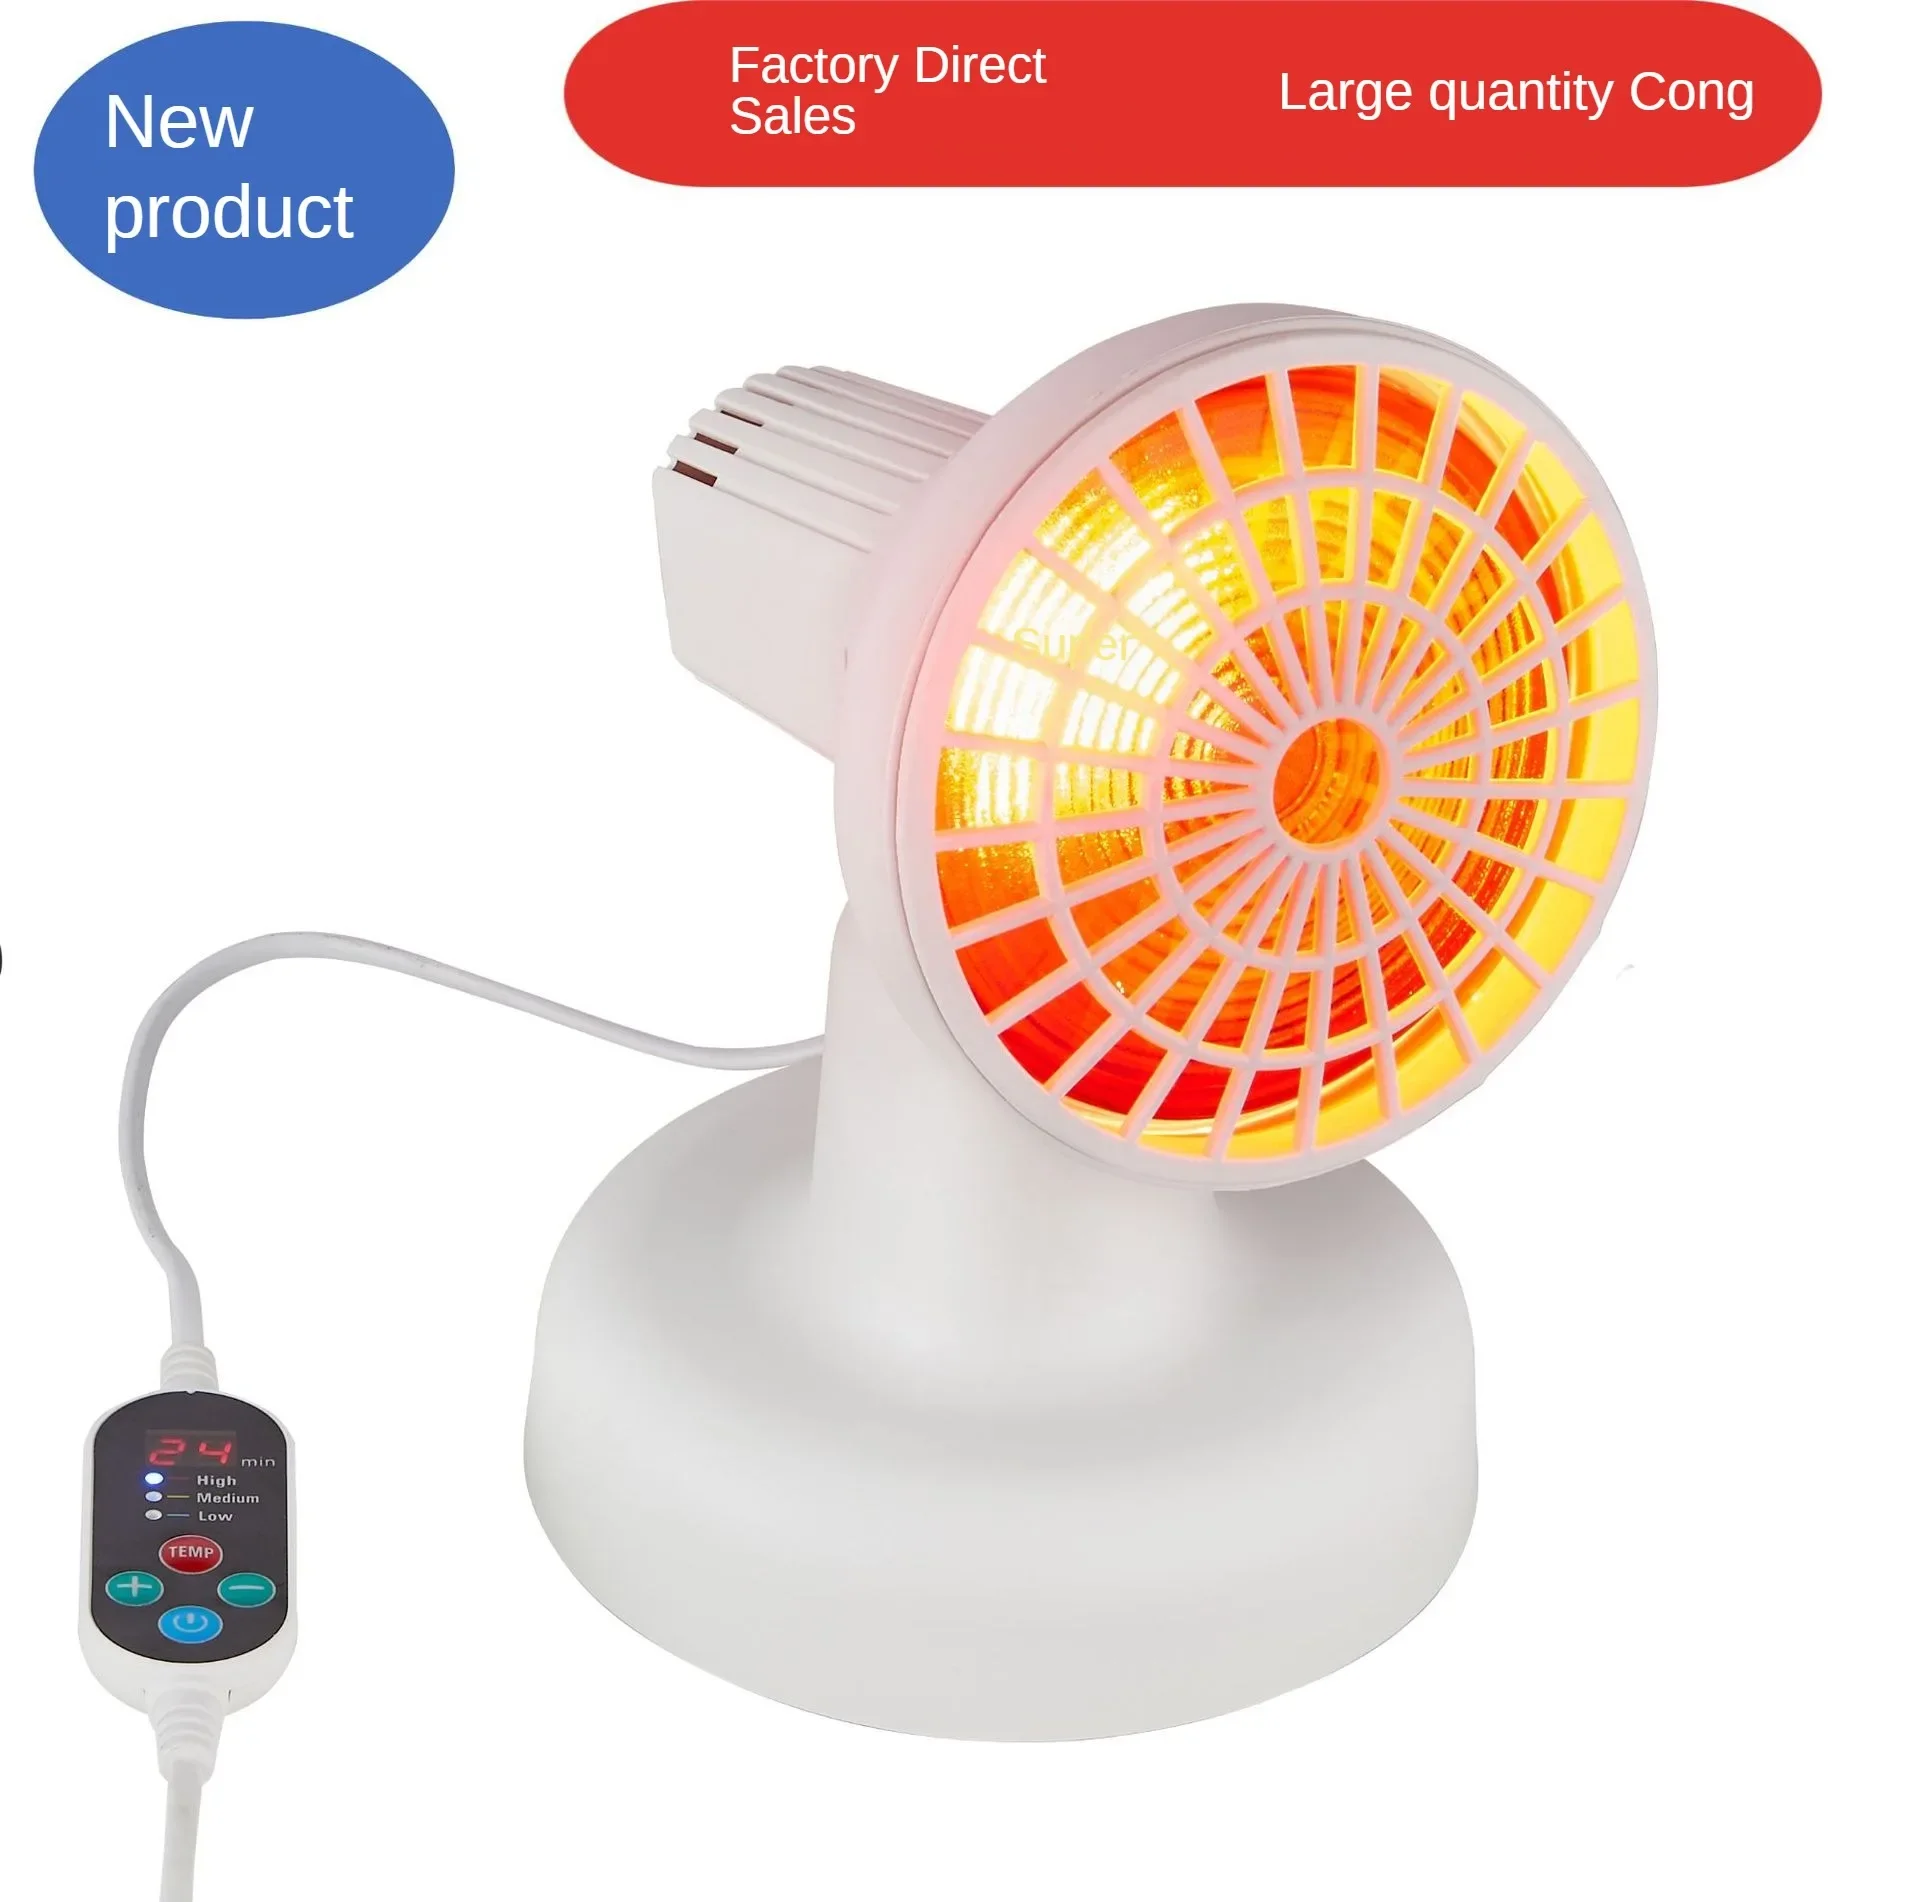 

Heating Lamp Infrared Desktop Physiotherapy E27 85-260V150W Home Skin Care Red Light Heating Beauty Salon Portable Mini Heating